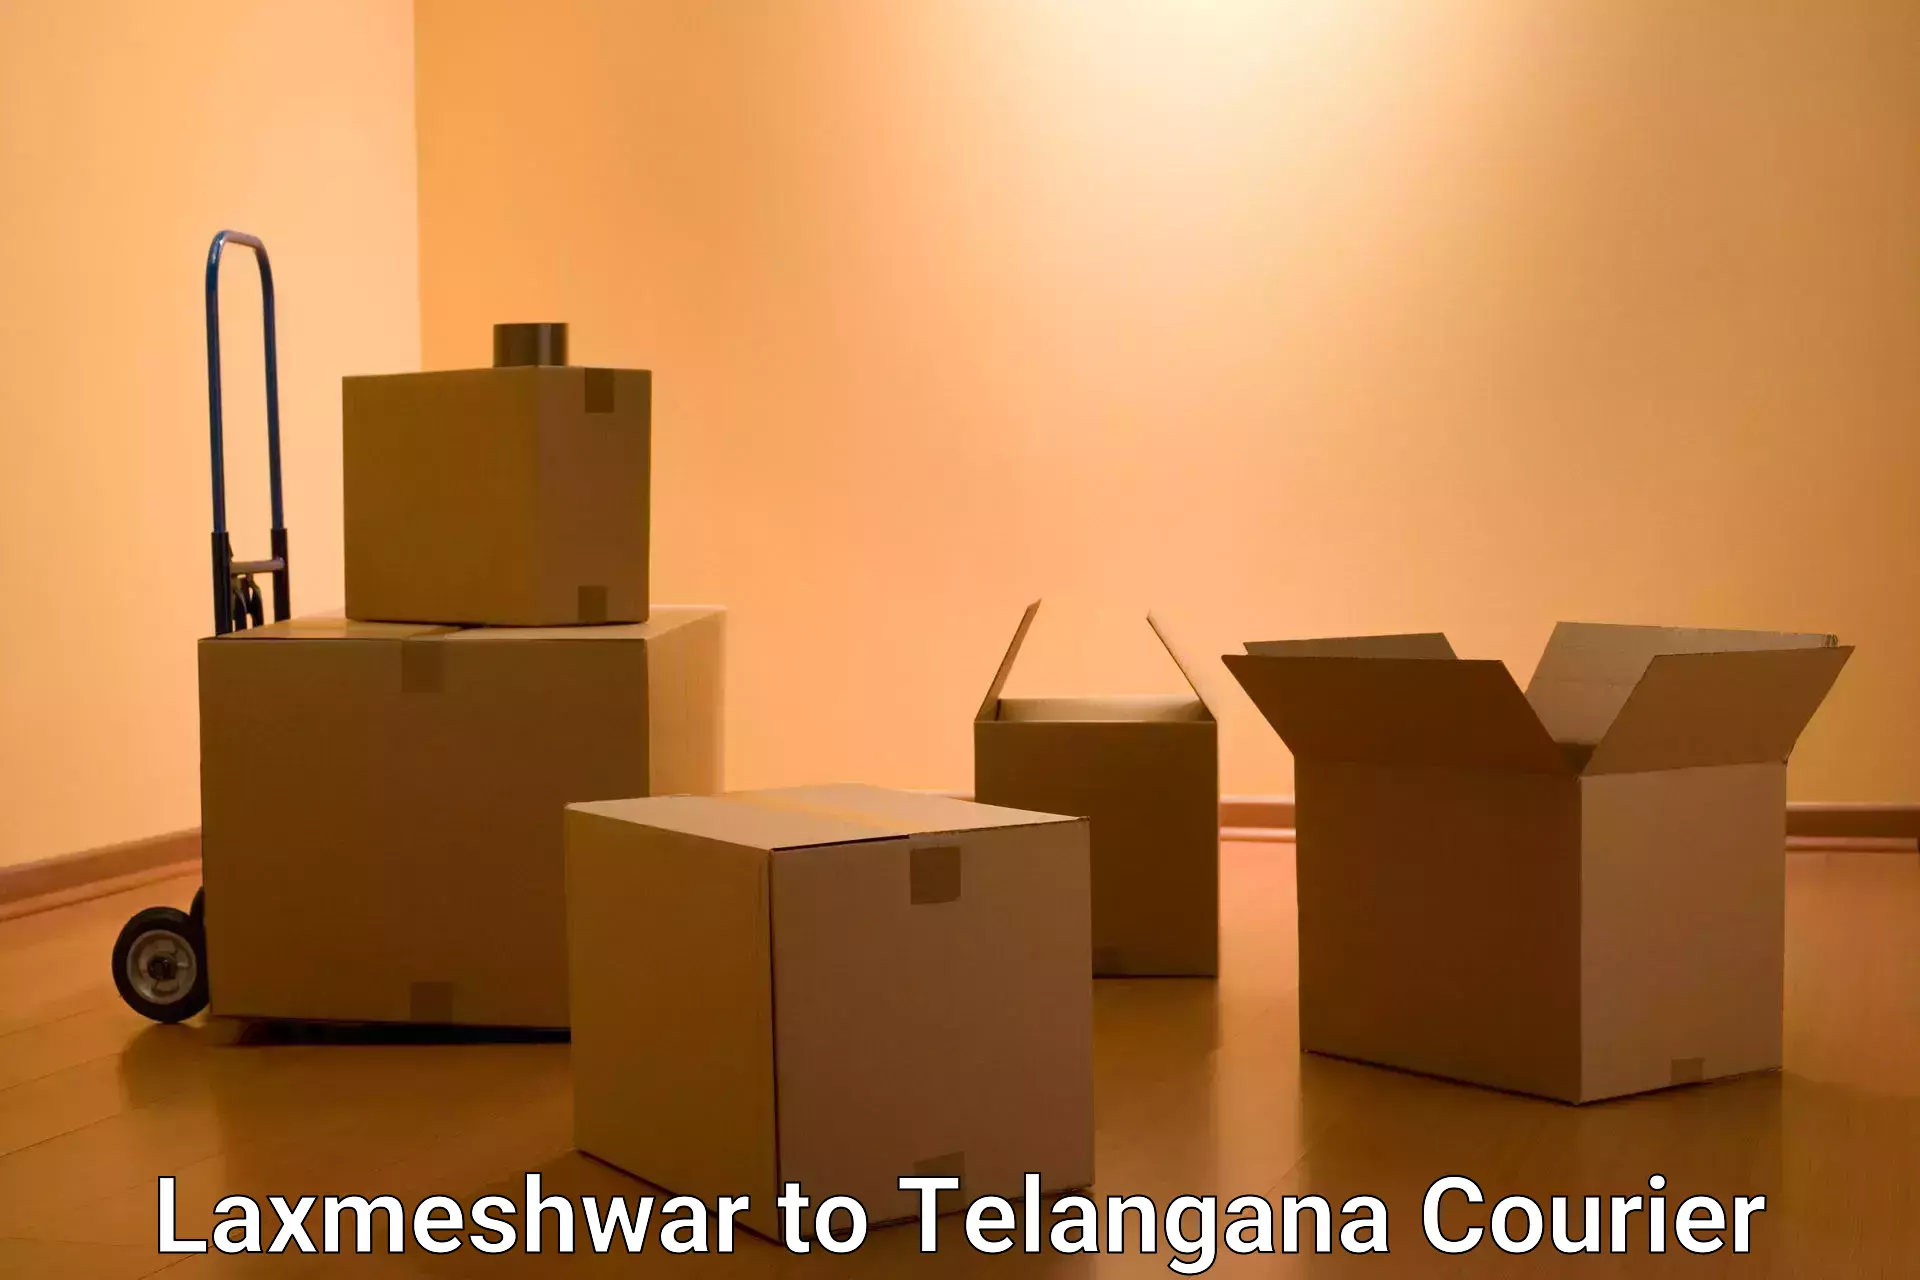 Reliable courier service Laxmeshwar to Rayaparthi